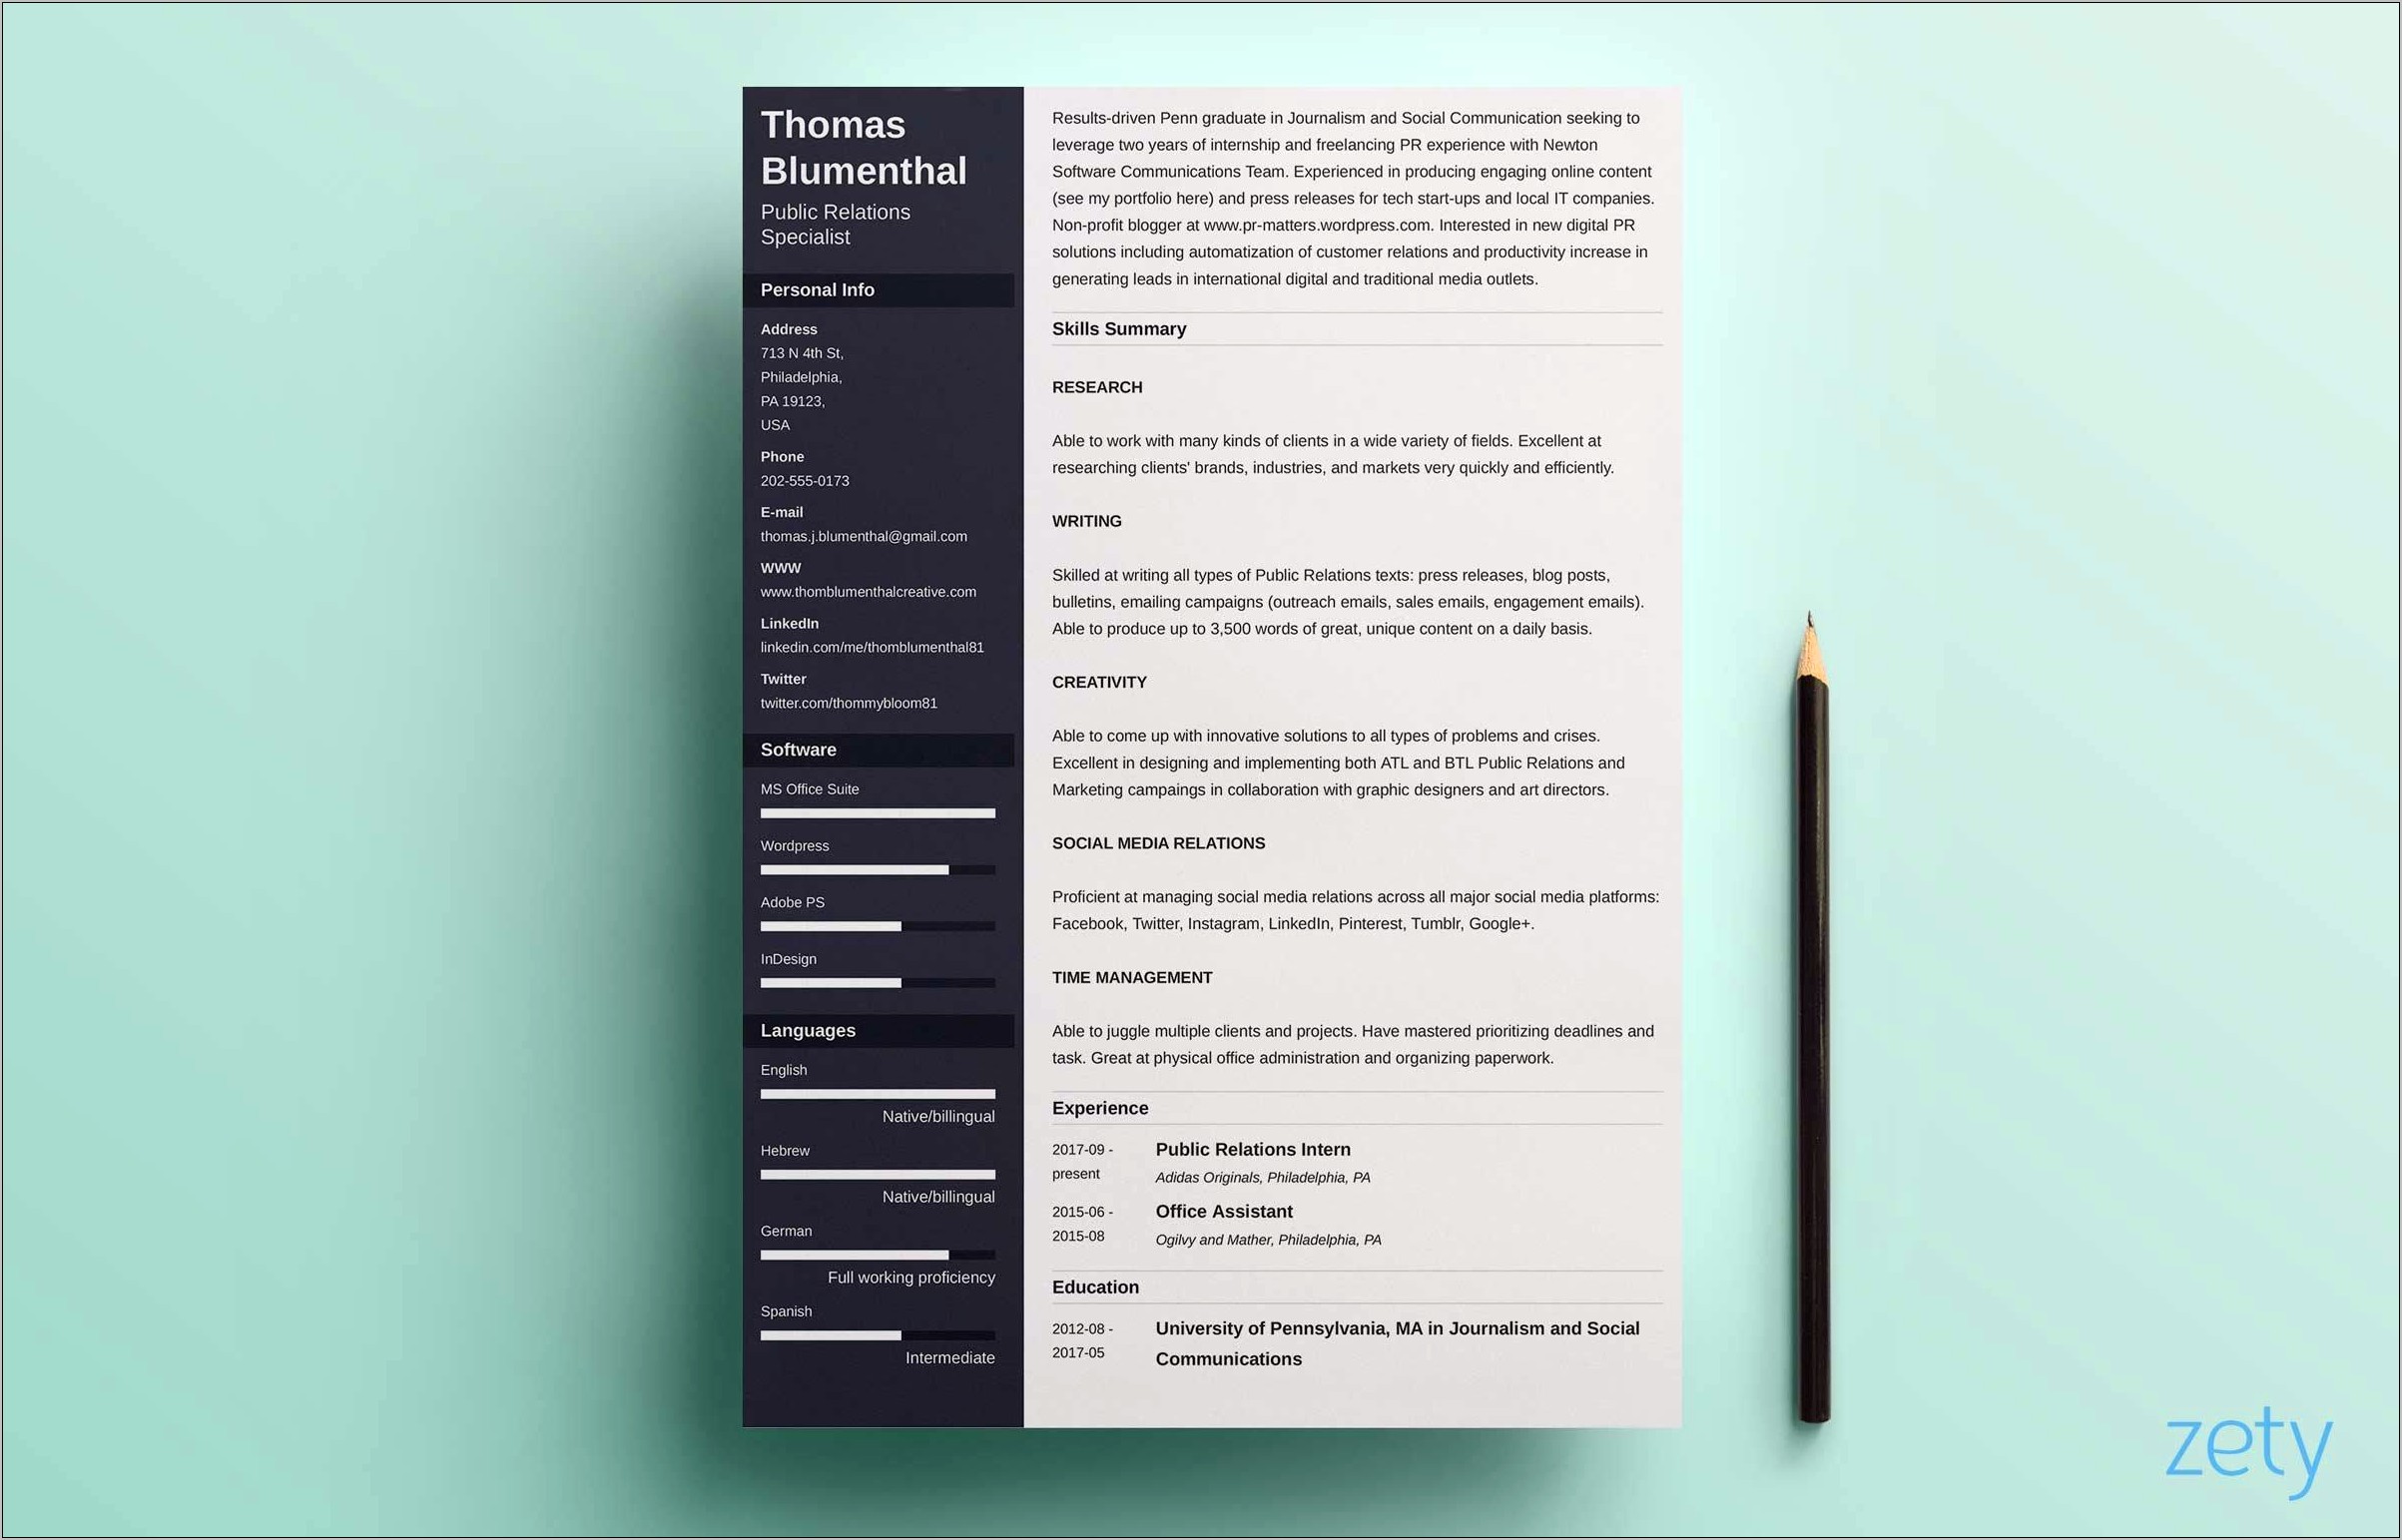 New Resume Format That Lists Skills Over Experience